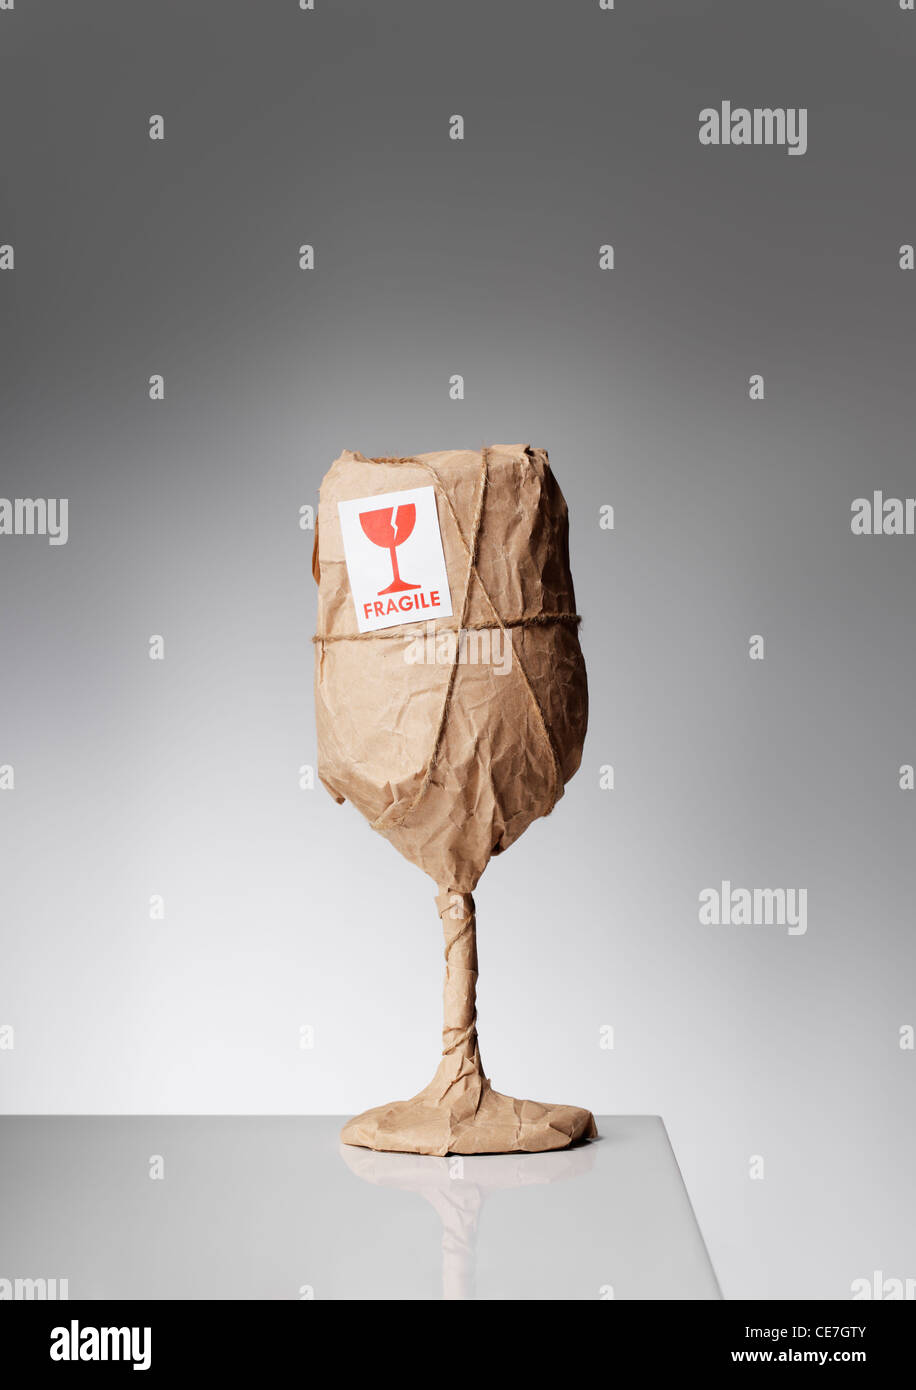 An obviously fragile object wrapped in paper and with a 'fragile' sticker. Stock Photo